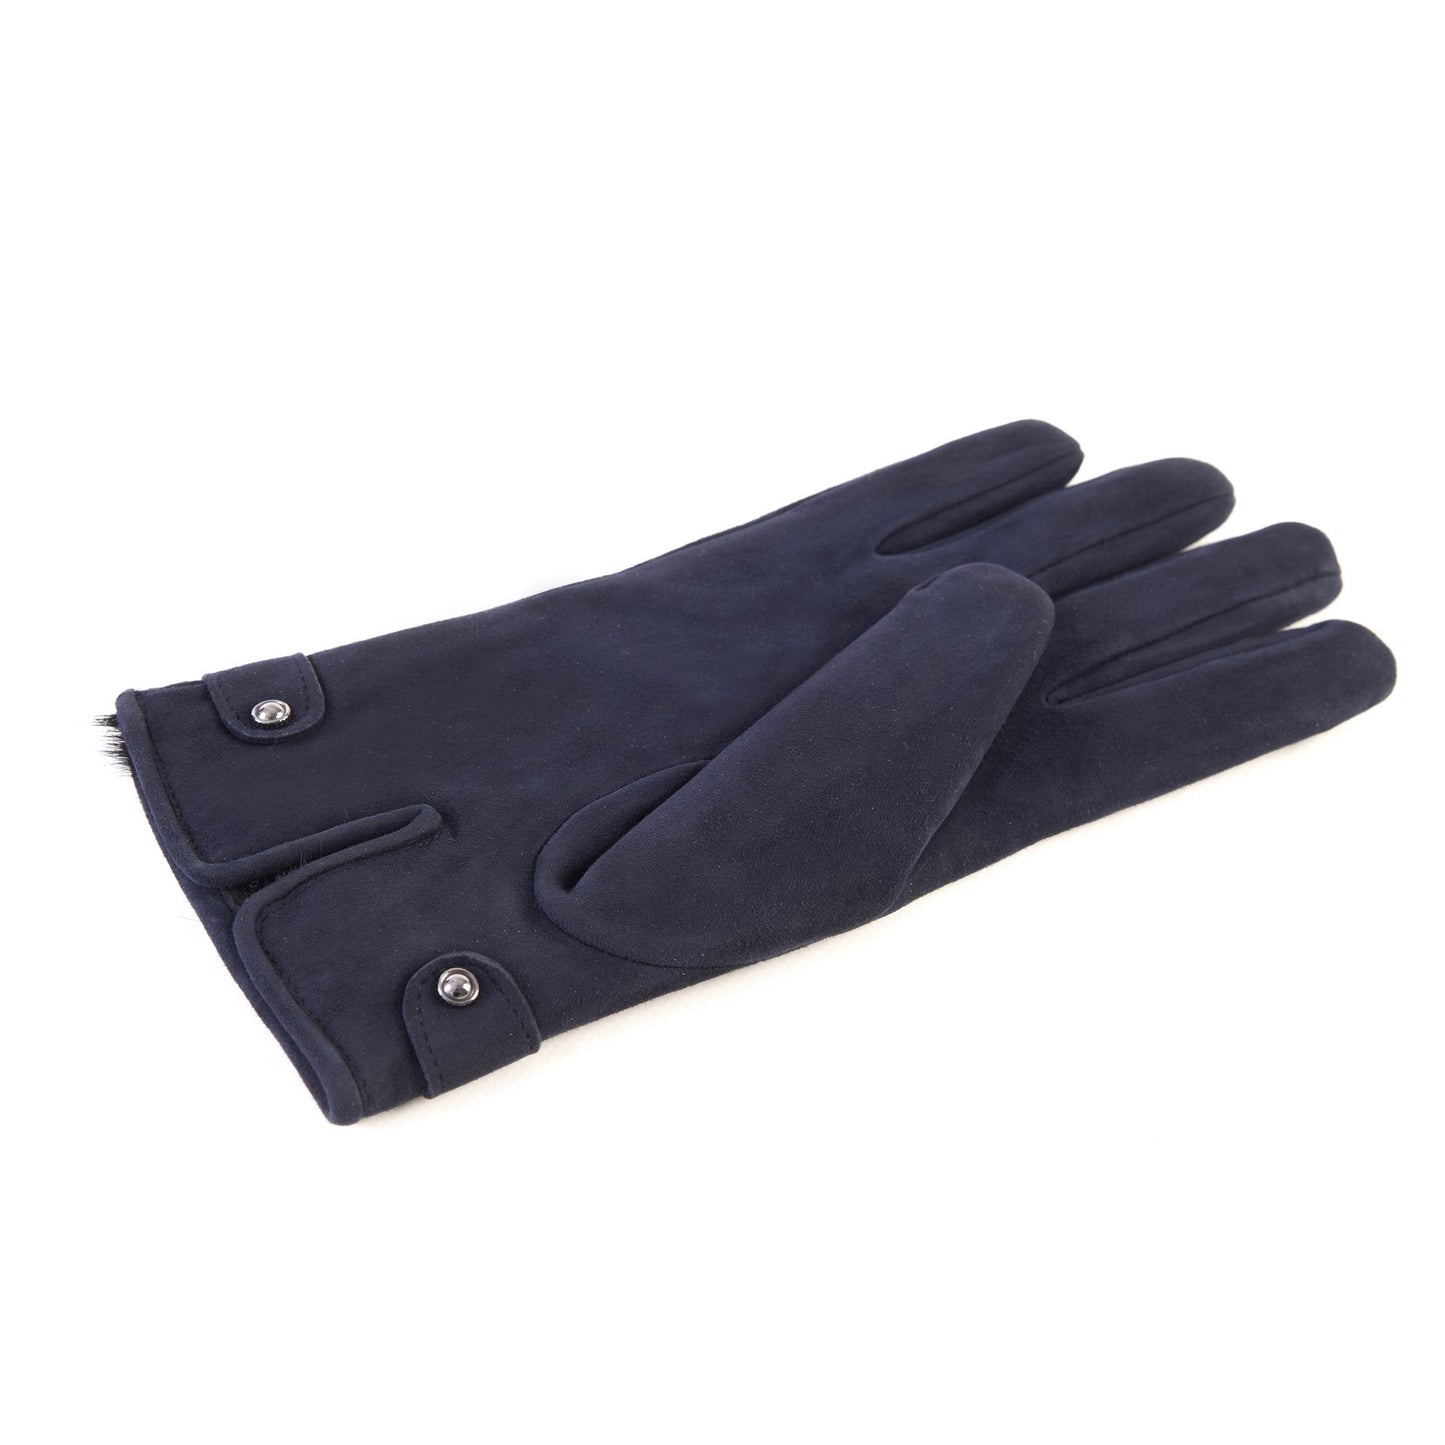 Men's navy suede leather gloves with strap and cashmere lining